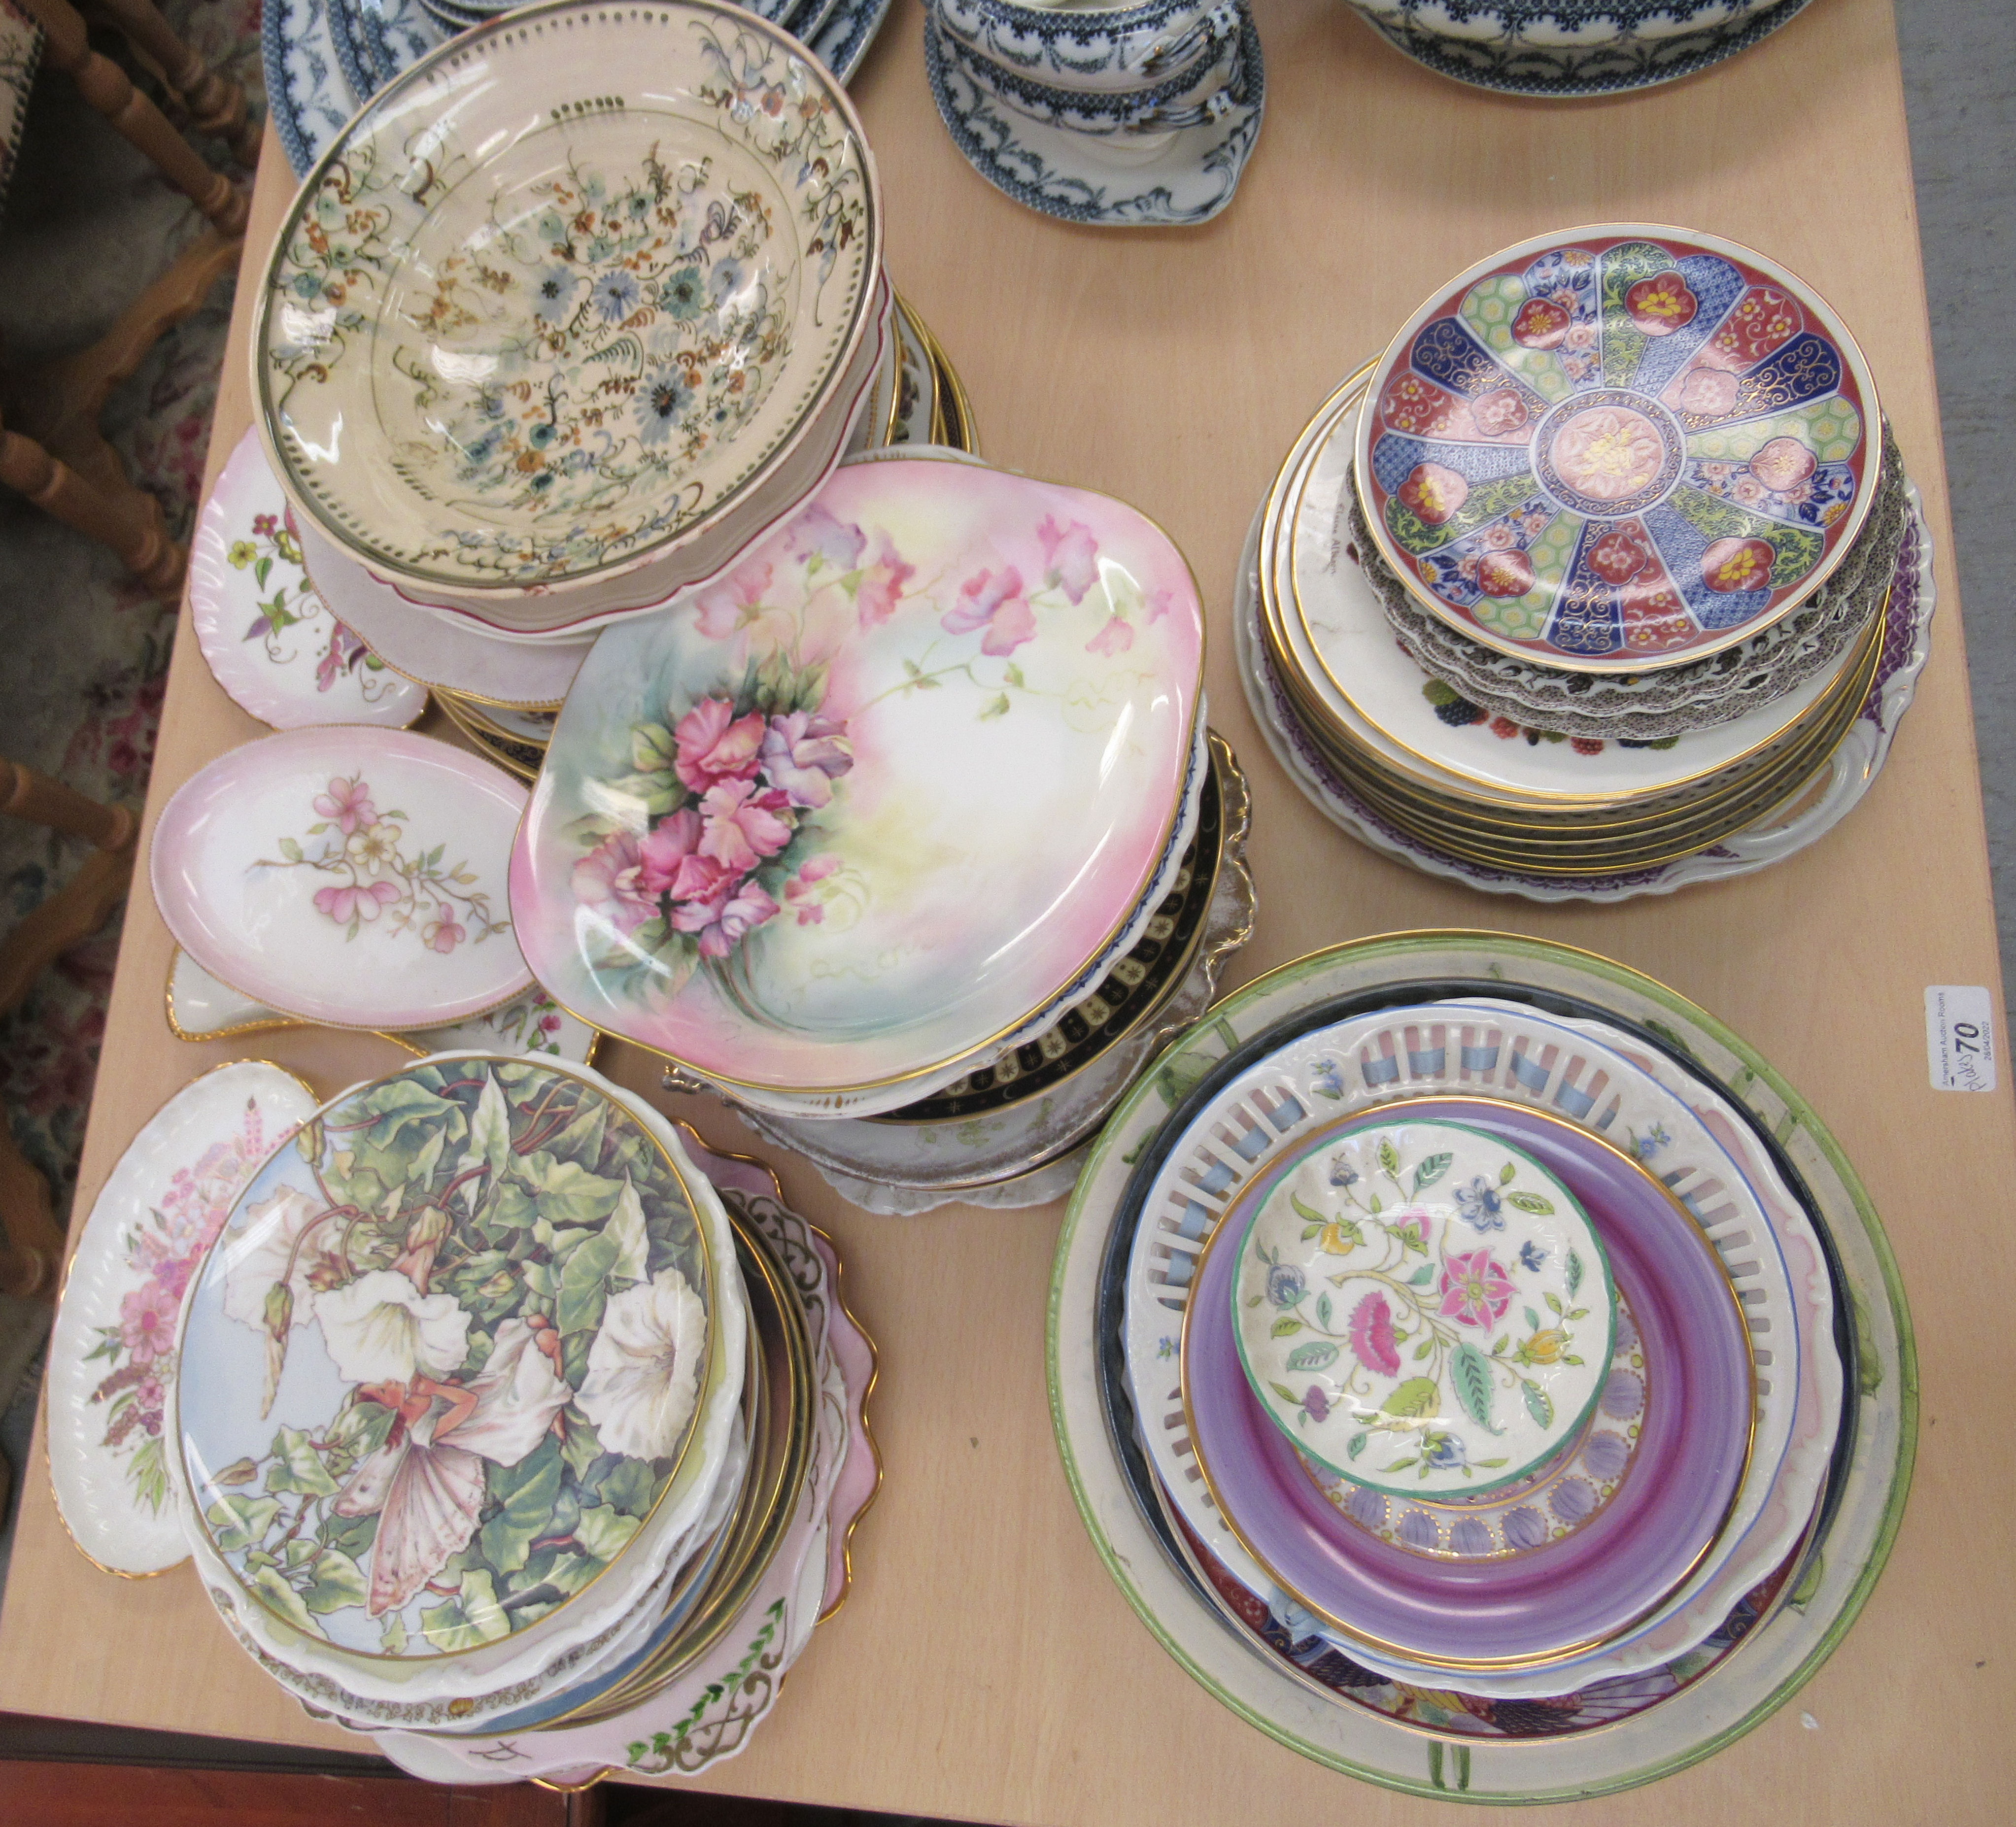 British and other European ceramic wall plates, some hand painted  various themes  largest 10"dia - Image 2 of 5